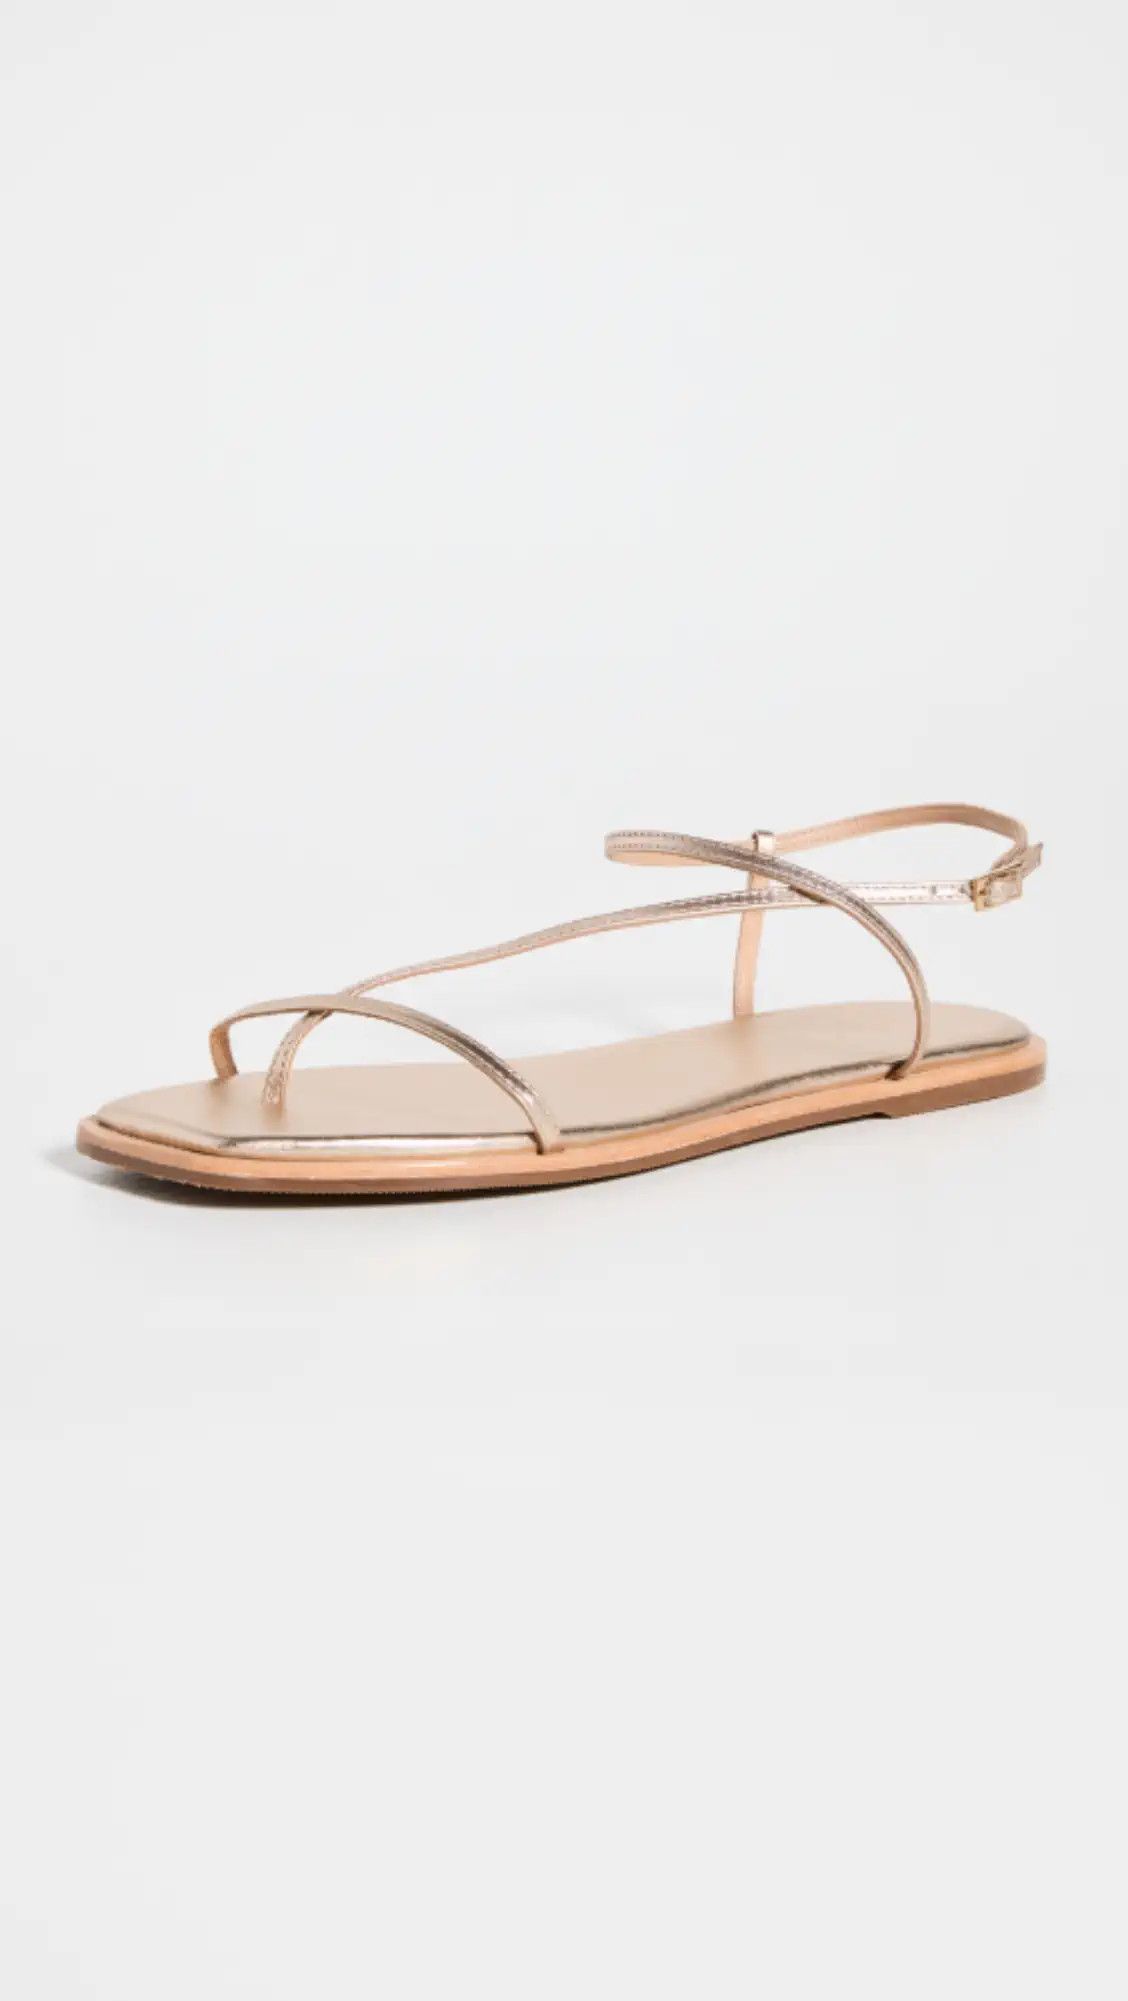 Alayta Square Toe Naked Sandals | Shopbop